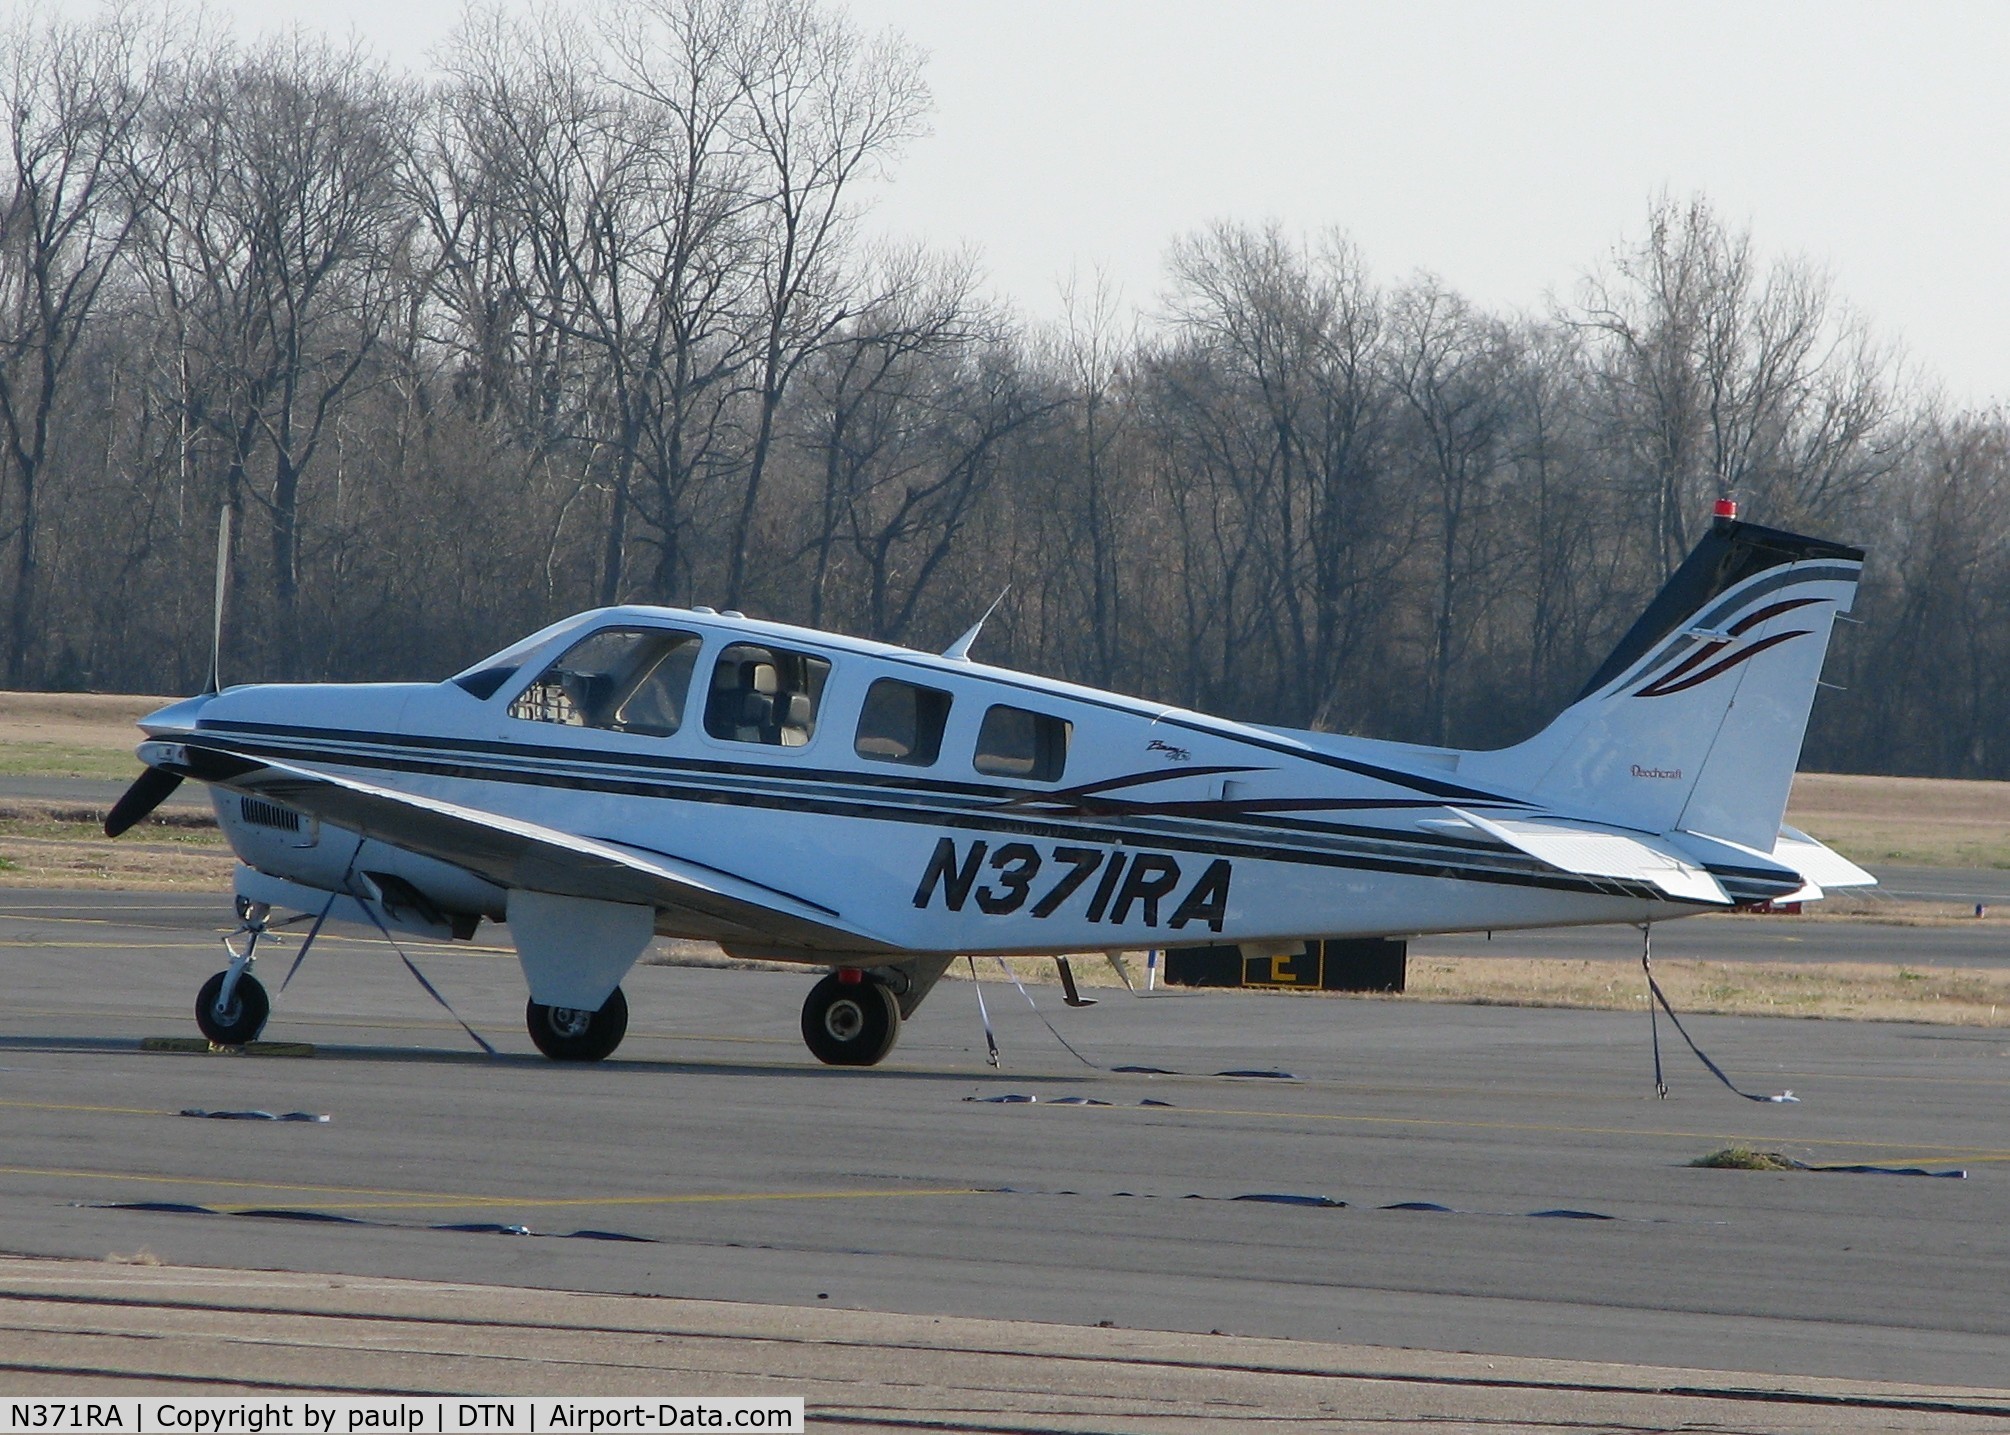 N371RA, Raytheon Aircraft Company A36 Bonanza C/N E-3590, Parked at the Downtown Shreveport airport.